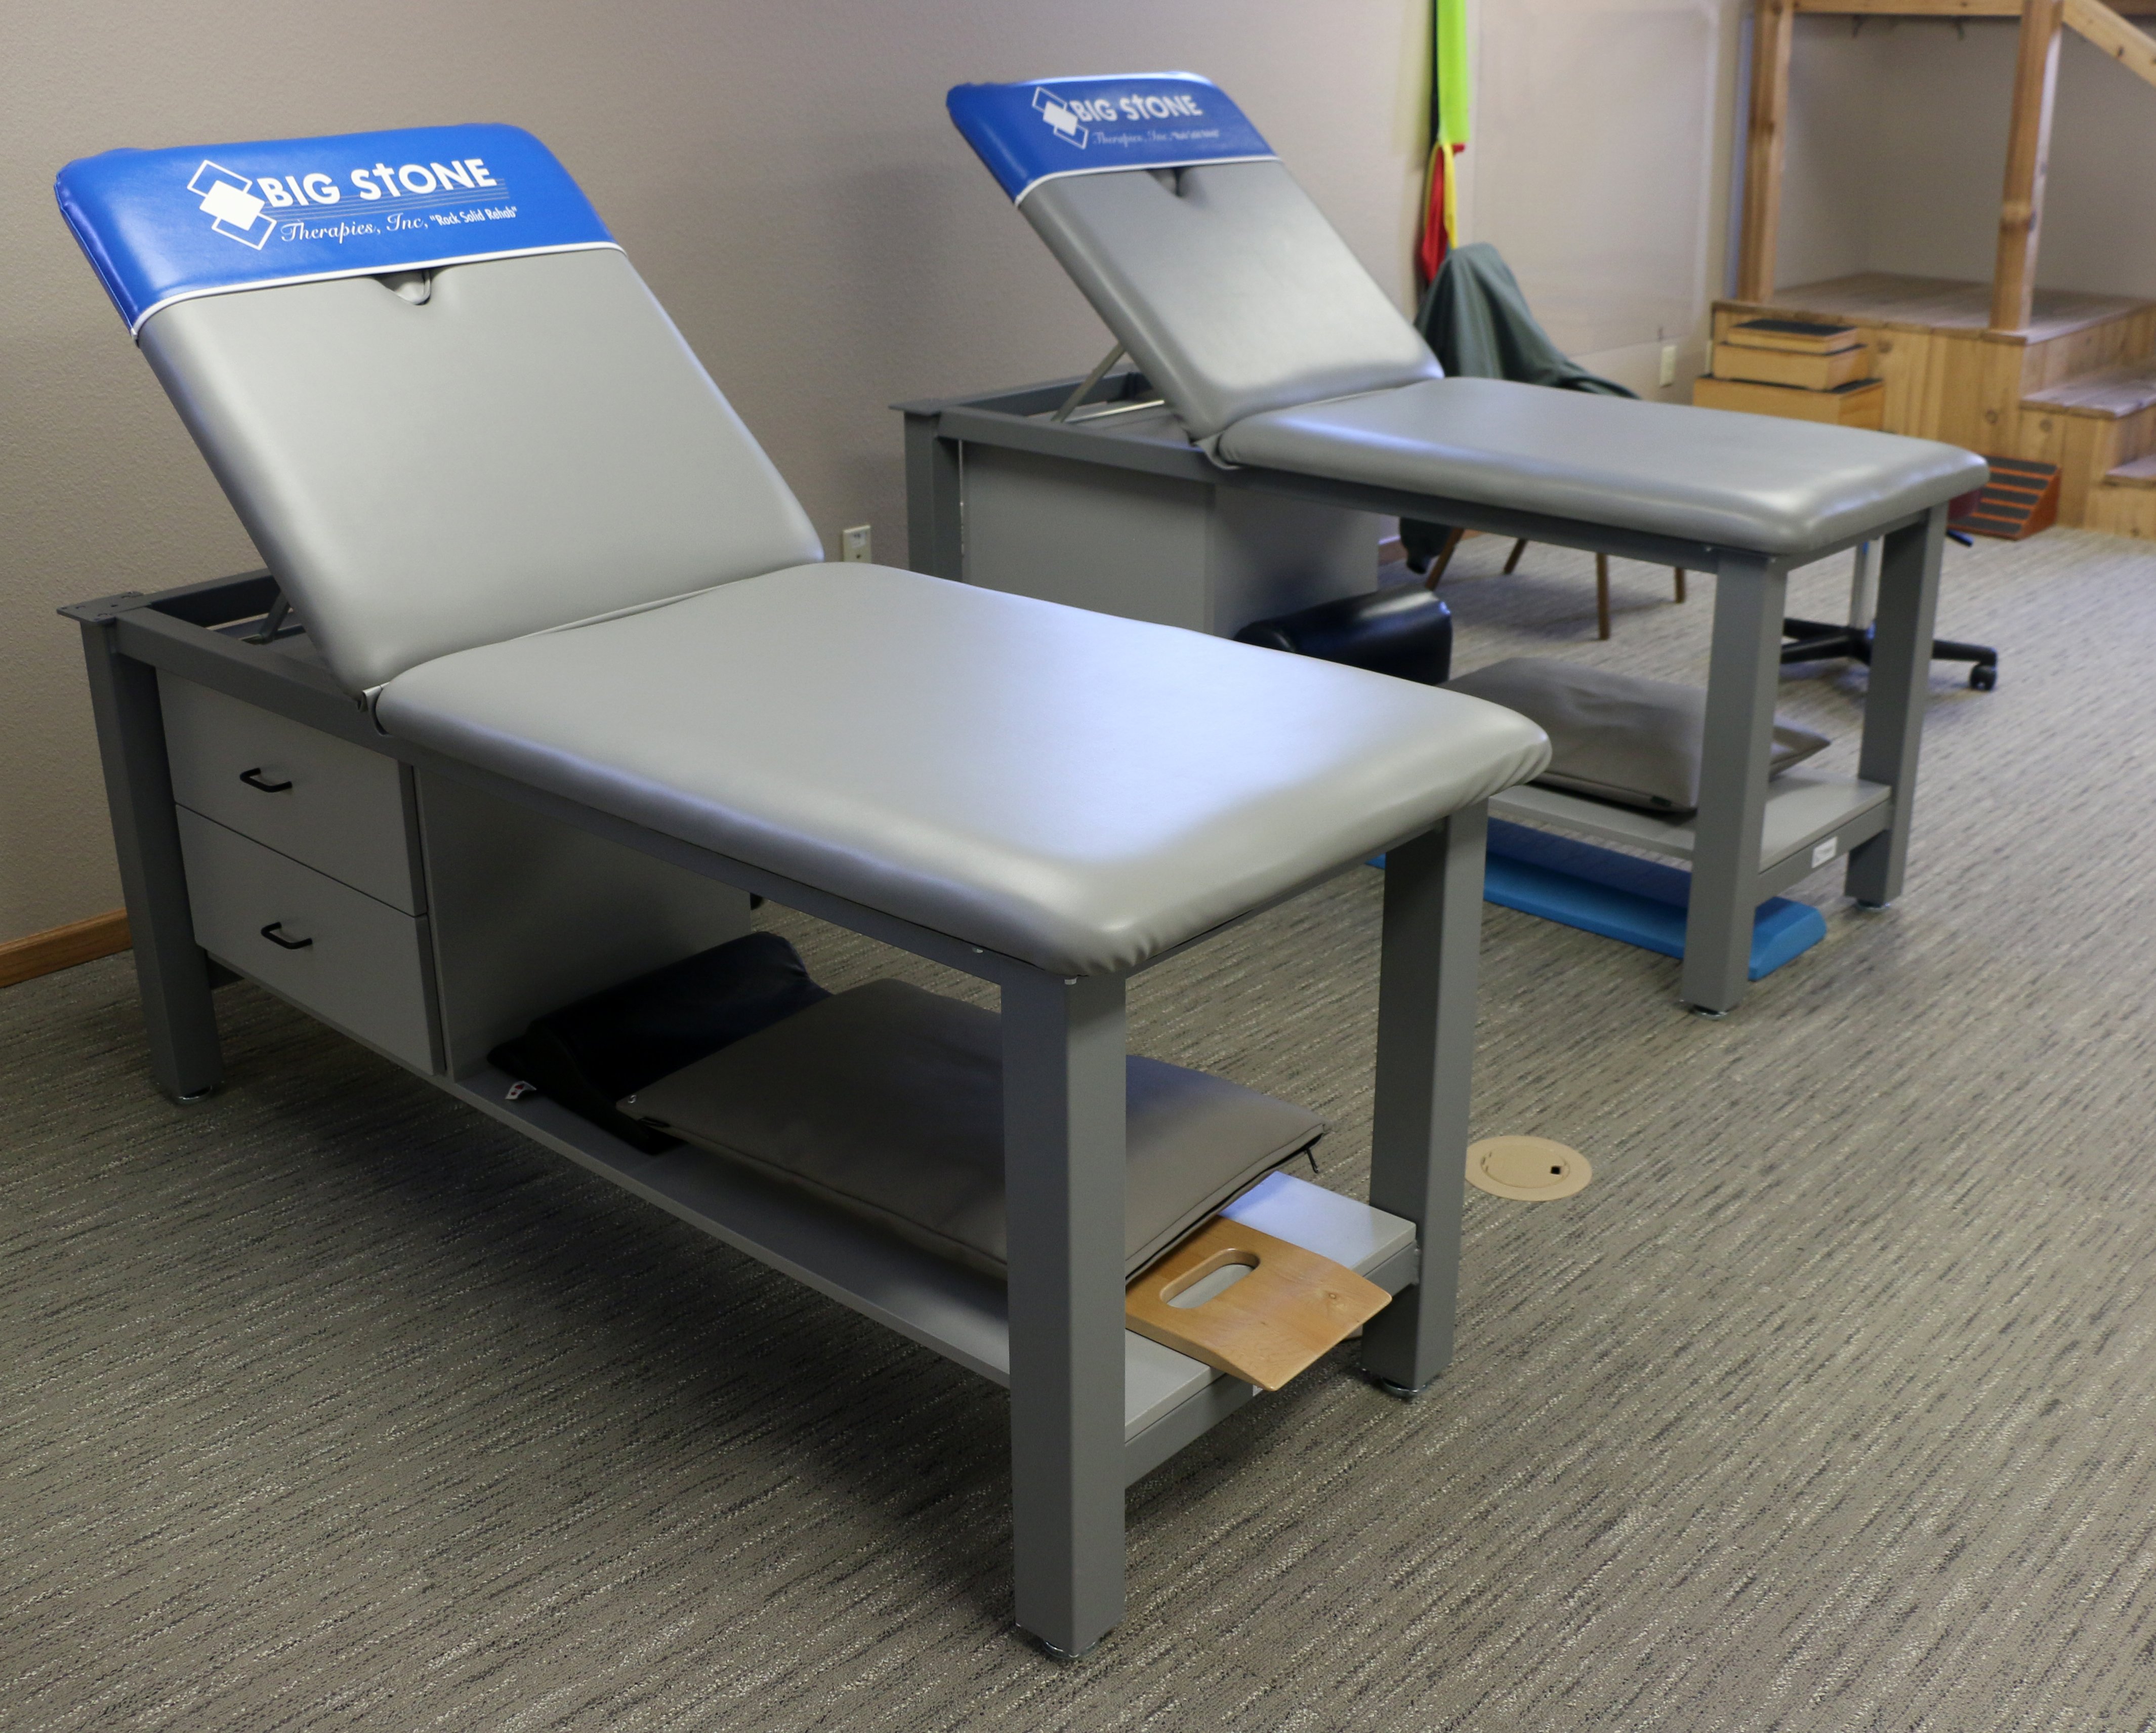 PHS Medical Announces the Official Release of Their Physical Therapy and Rehab Product Line